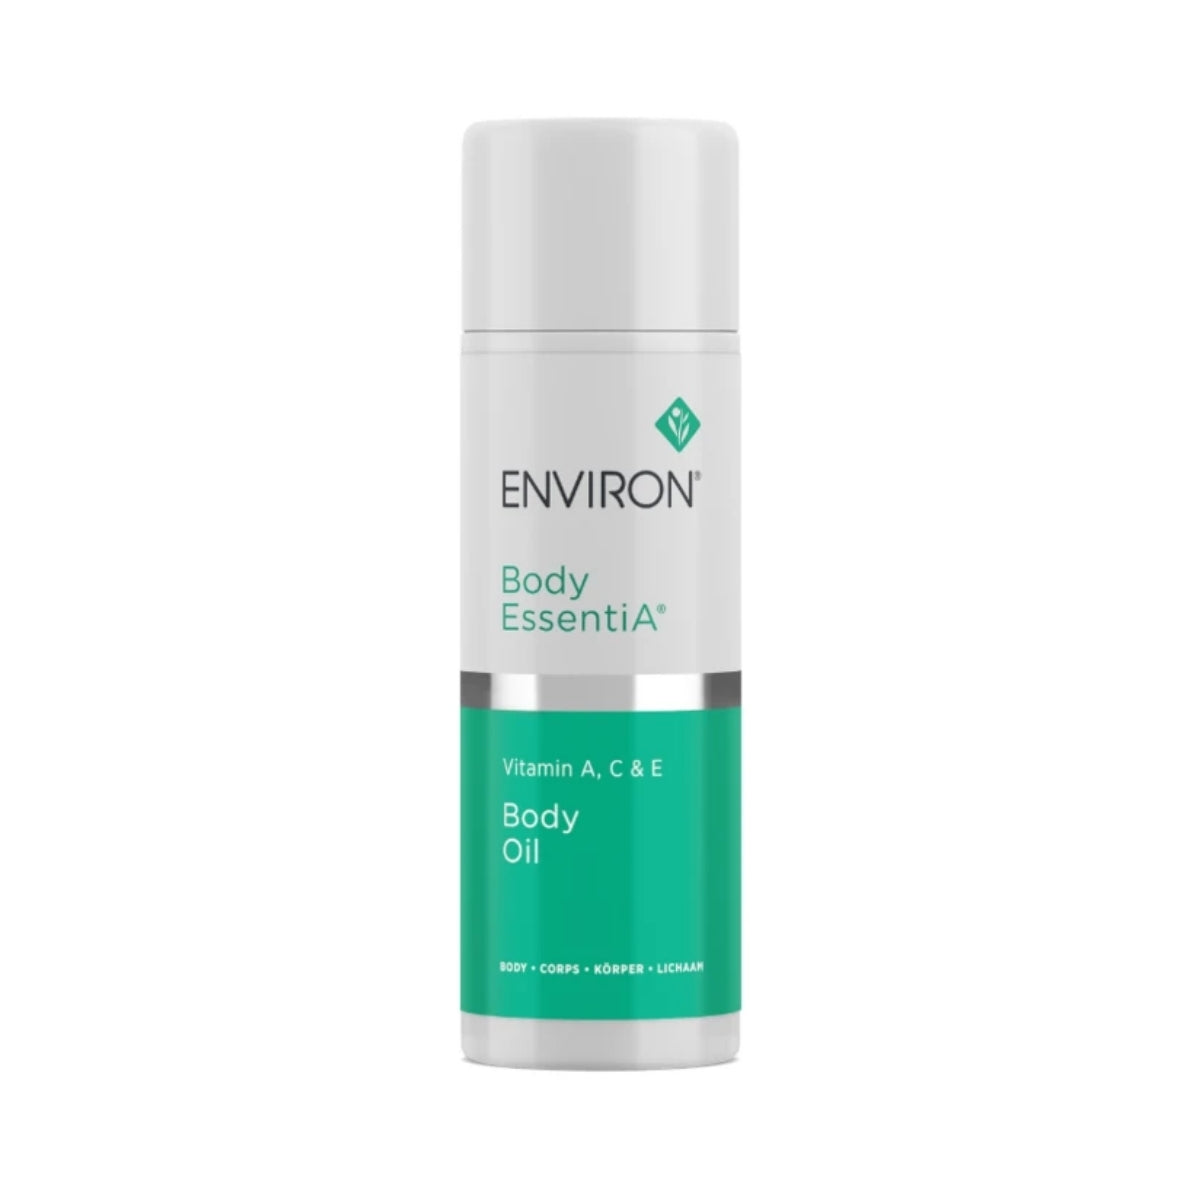 Environ Bestseller Body A, C & E Oil- Expiry End Of March 24